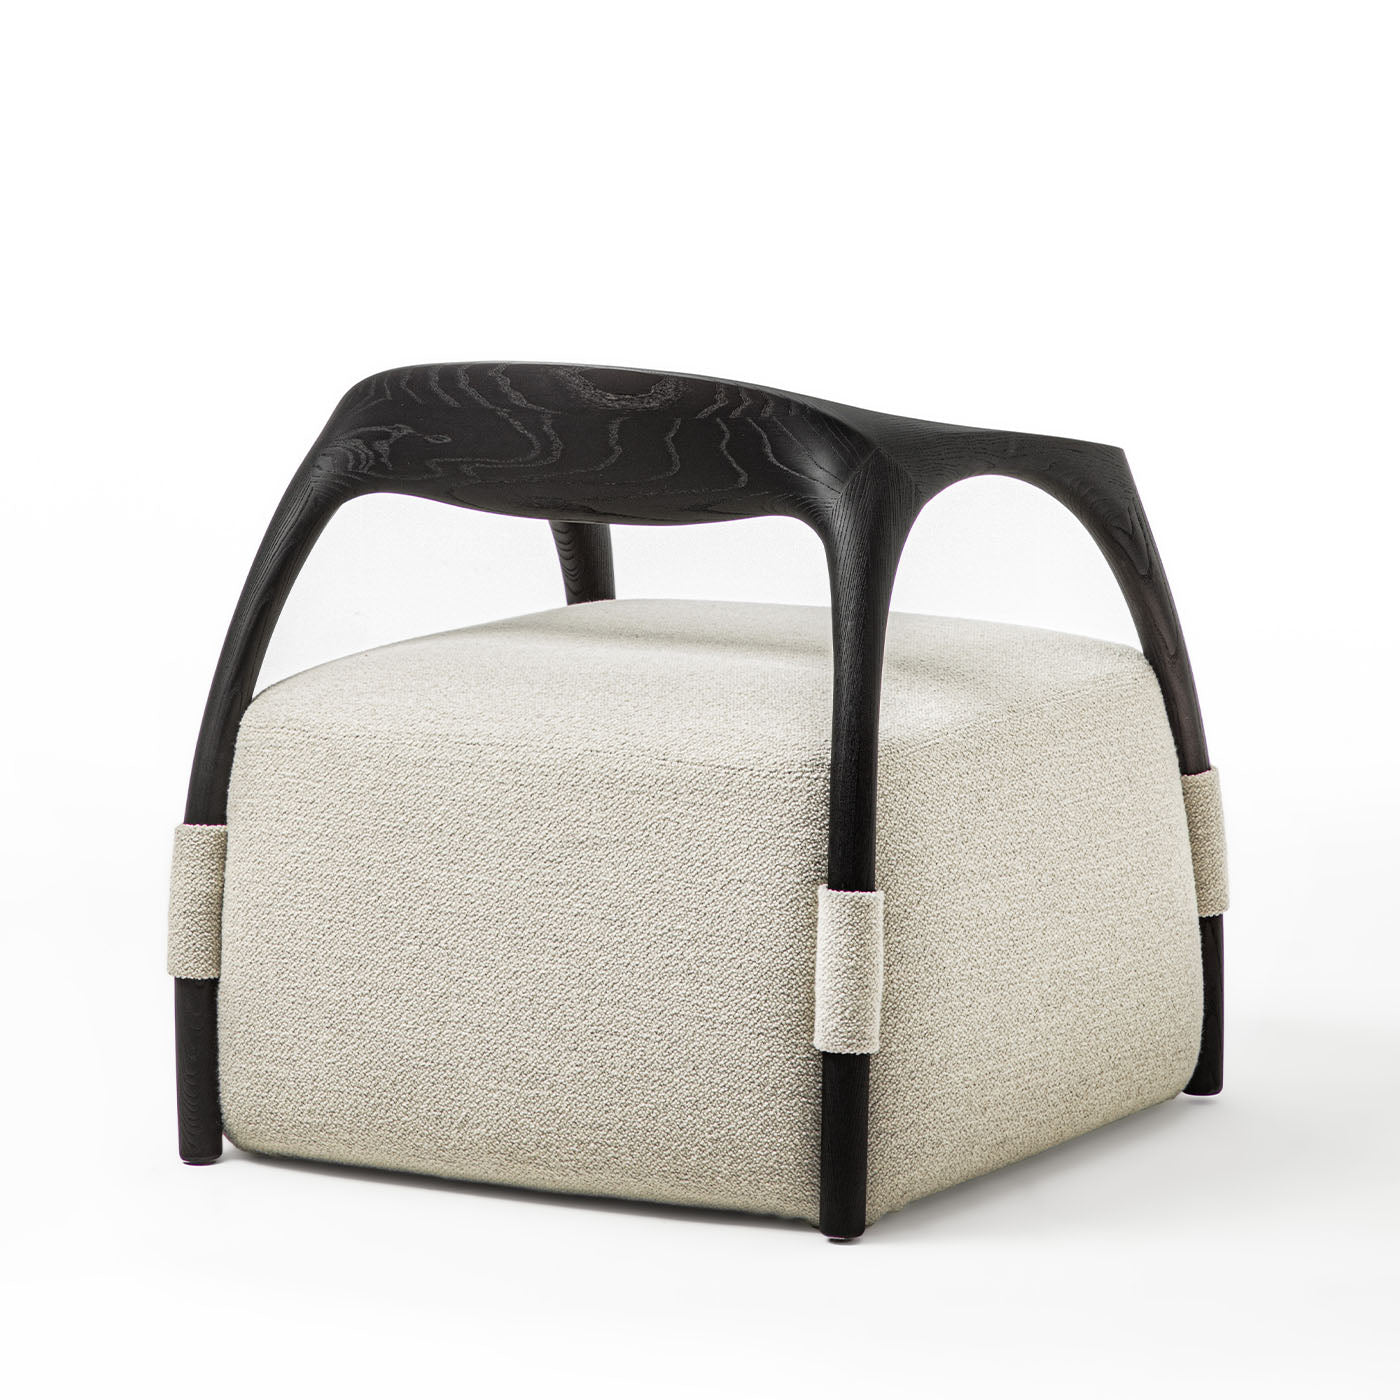 Chassis Black Ash Solid Wood Armchair & Fabric Upholstery - Alternative view 1